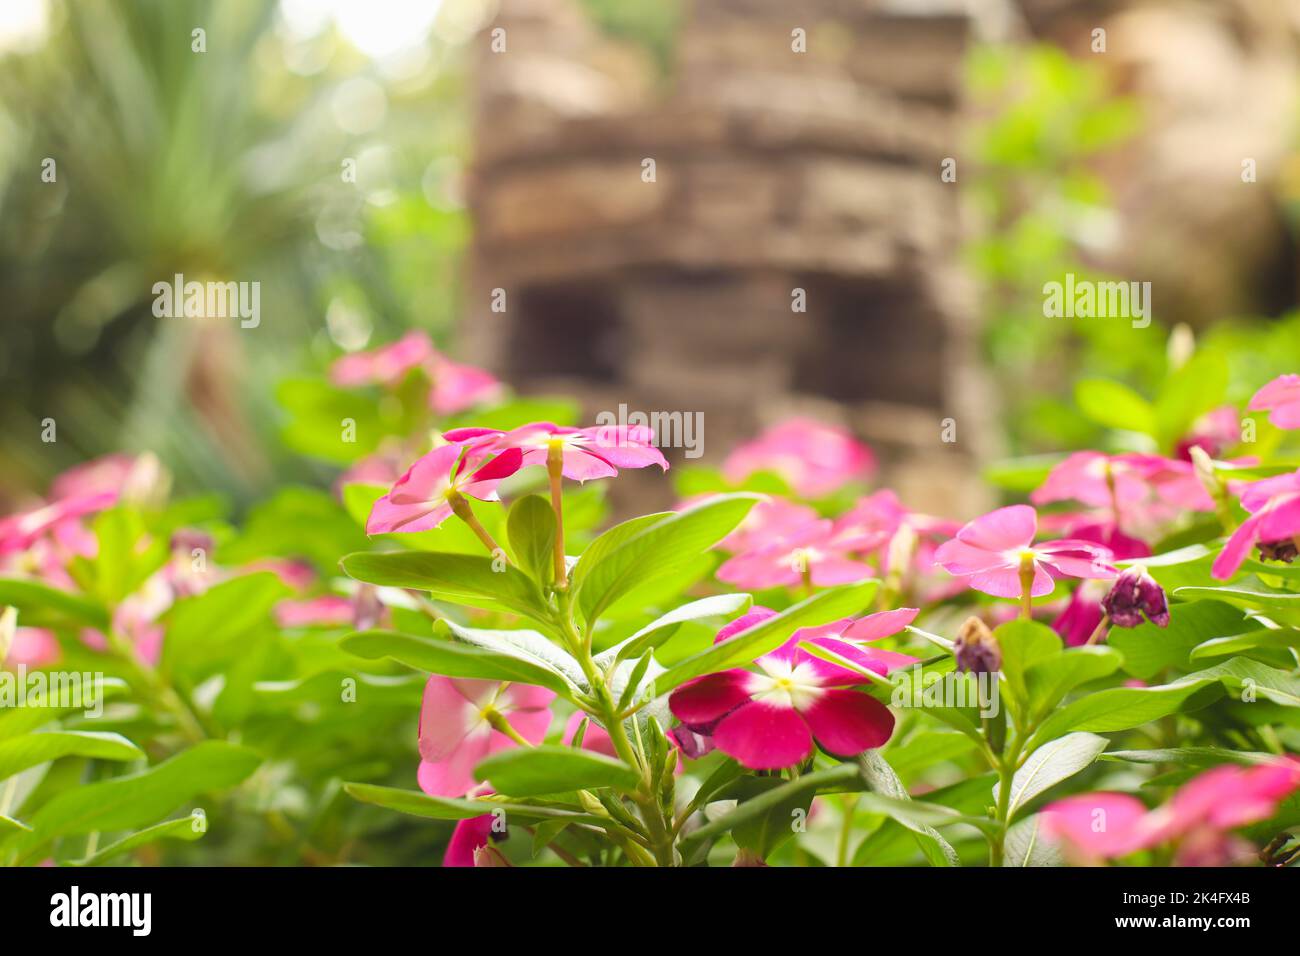 Pink periwinkle or catharanthus a lot. Flower garden, flowerbed. Catharanthus roseus, Madagascar periwinkle, Vinca, Old maid, Cayenne jasmine, Rose pe Stock Photo